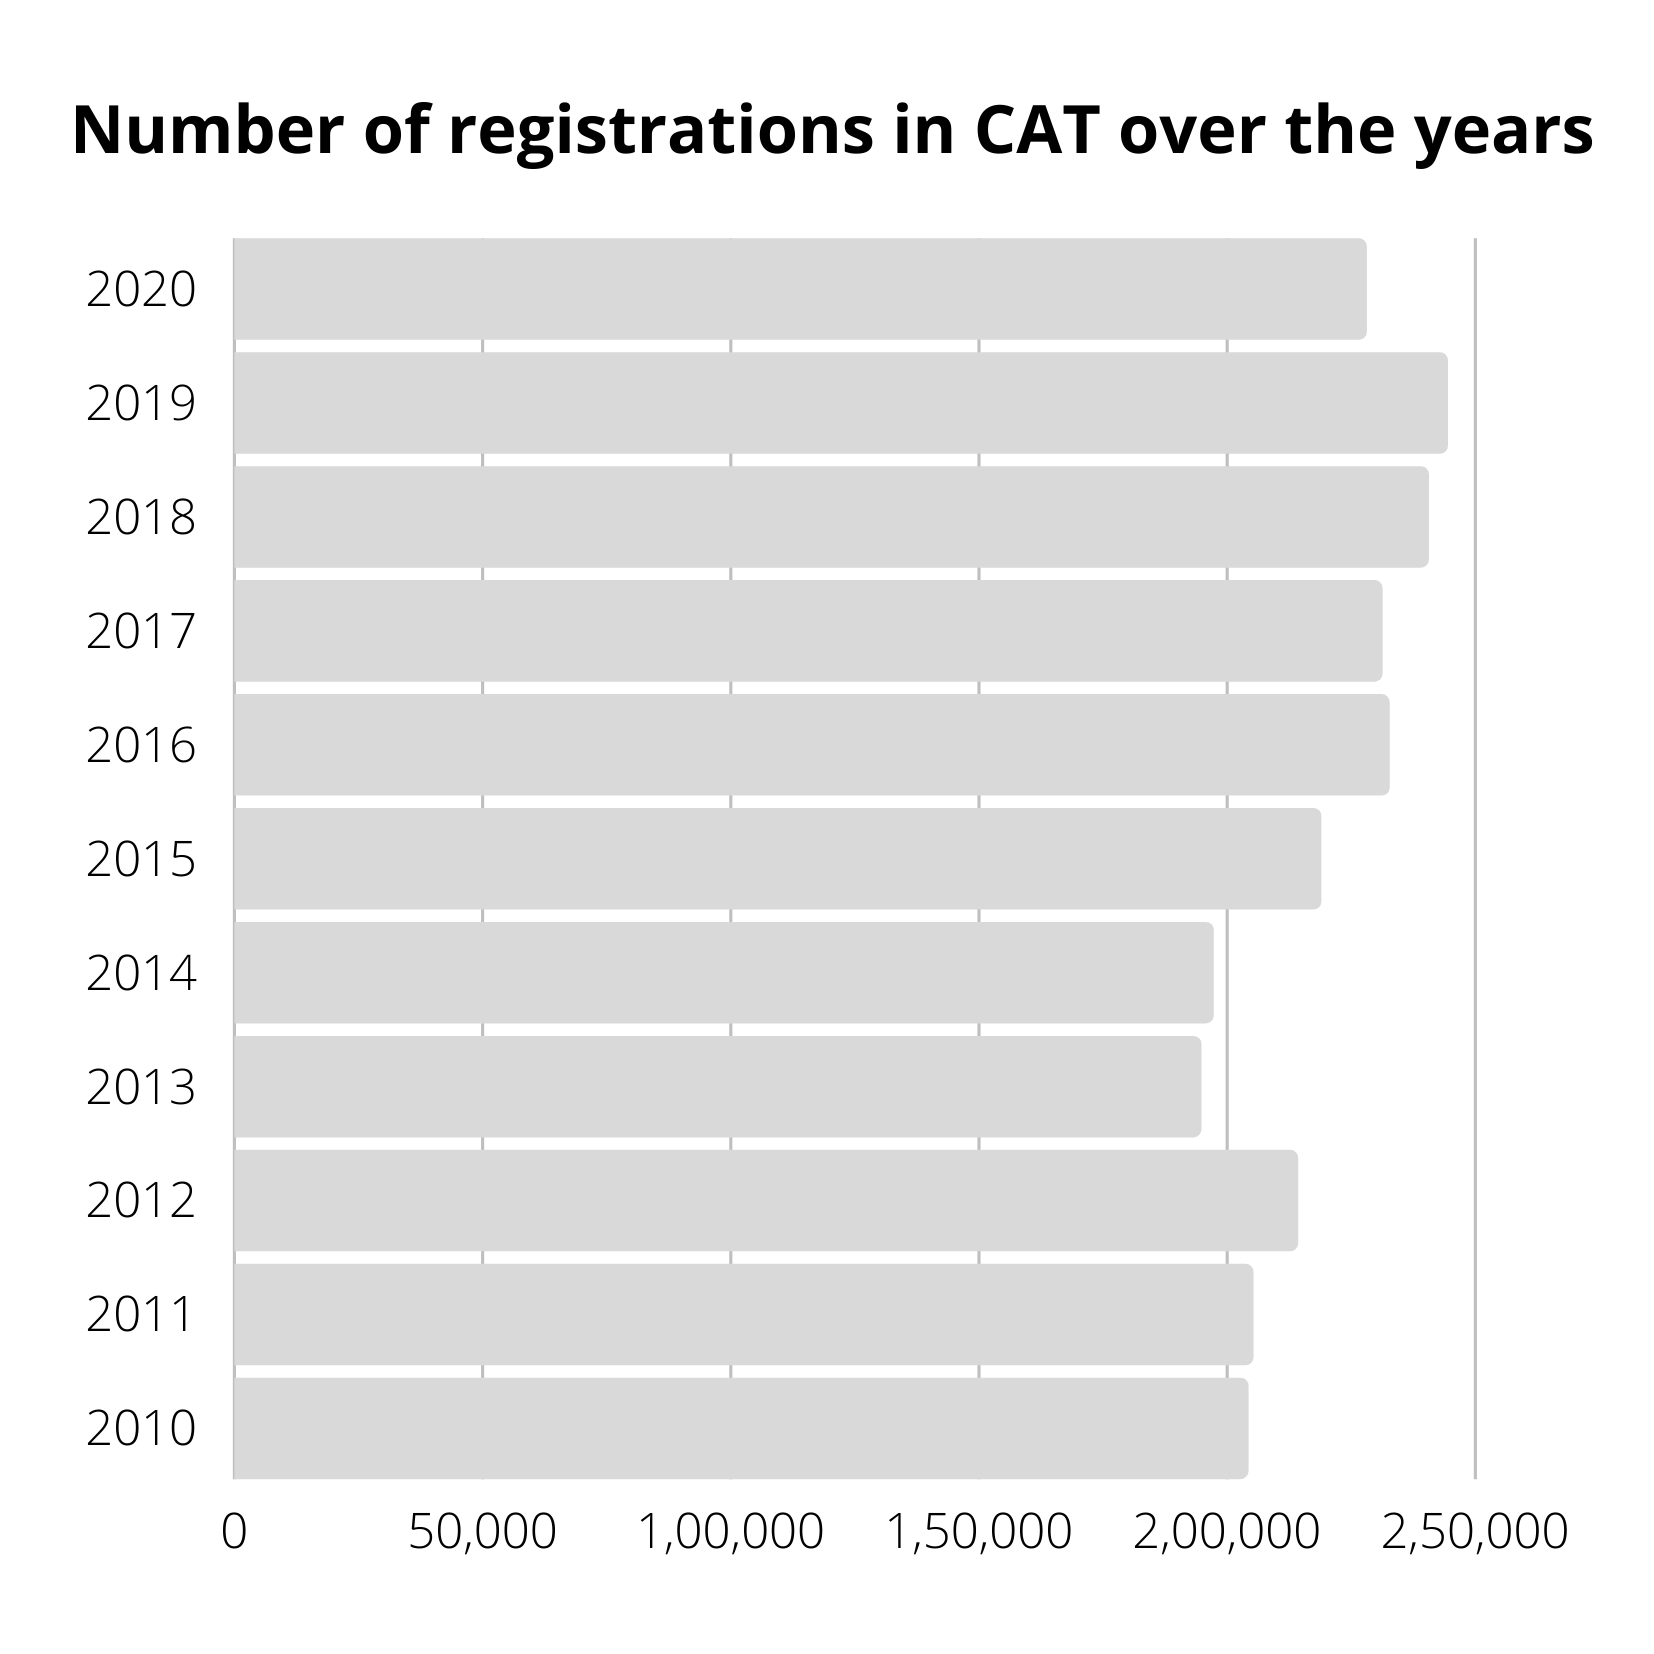 Number of registration over the years in the CAT exam